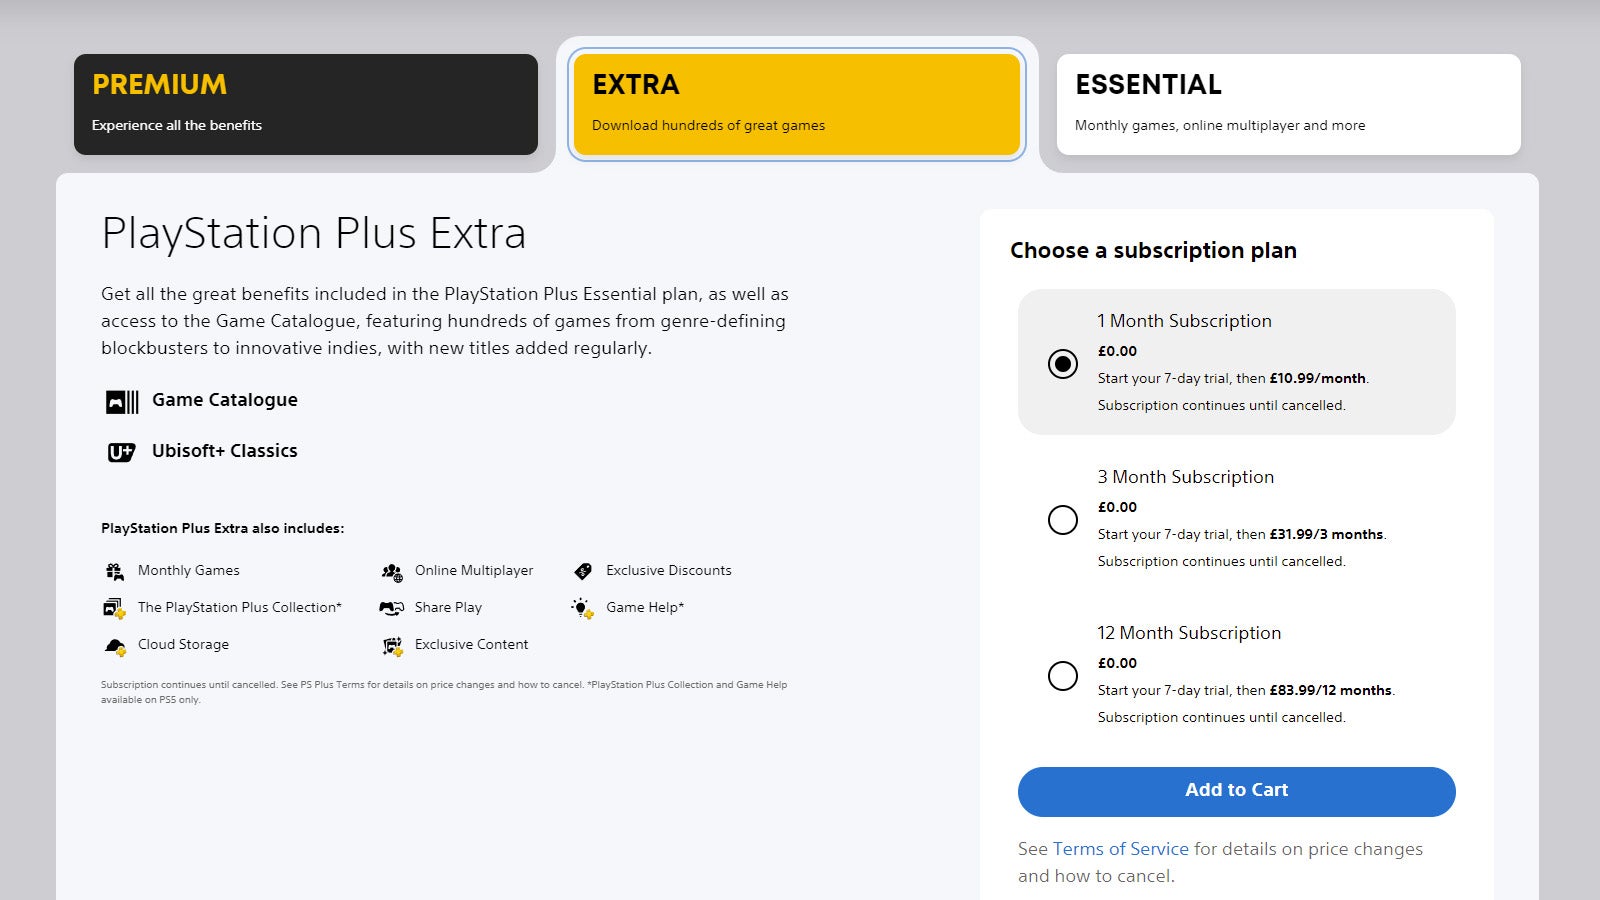 PlayStation Plus Extra now begins with a free trial.